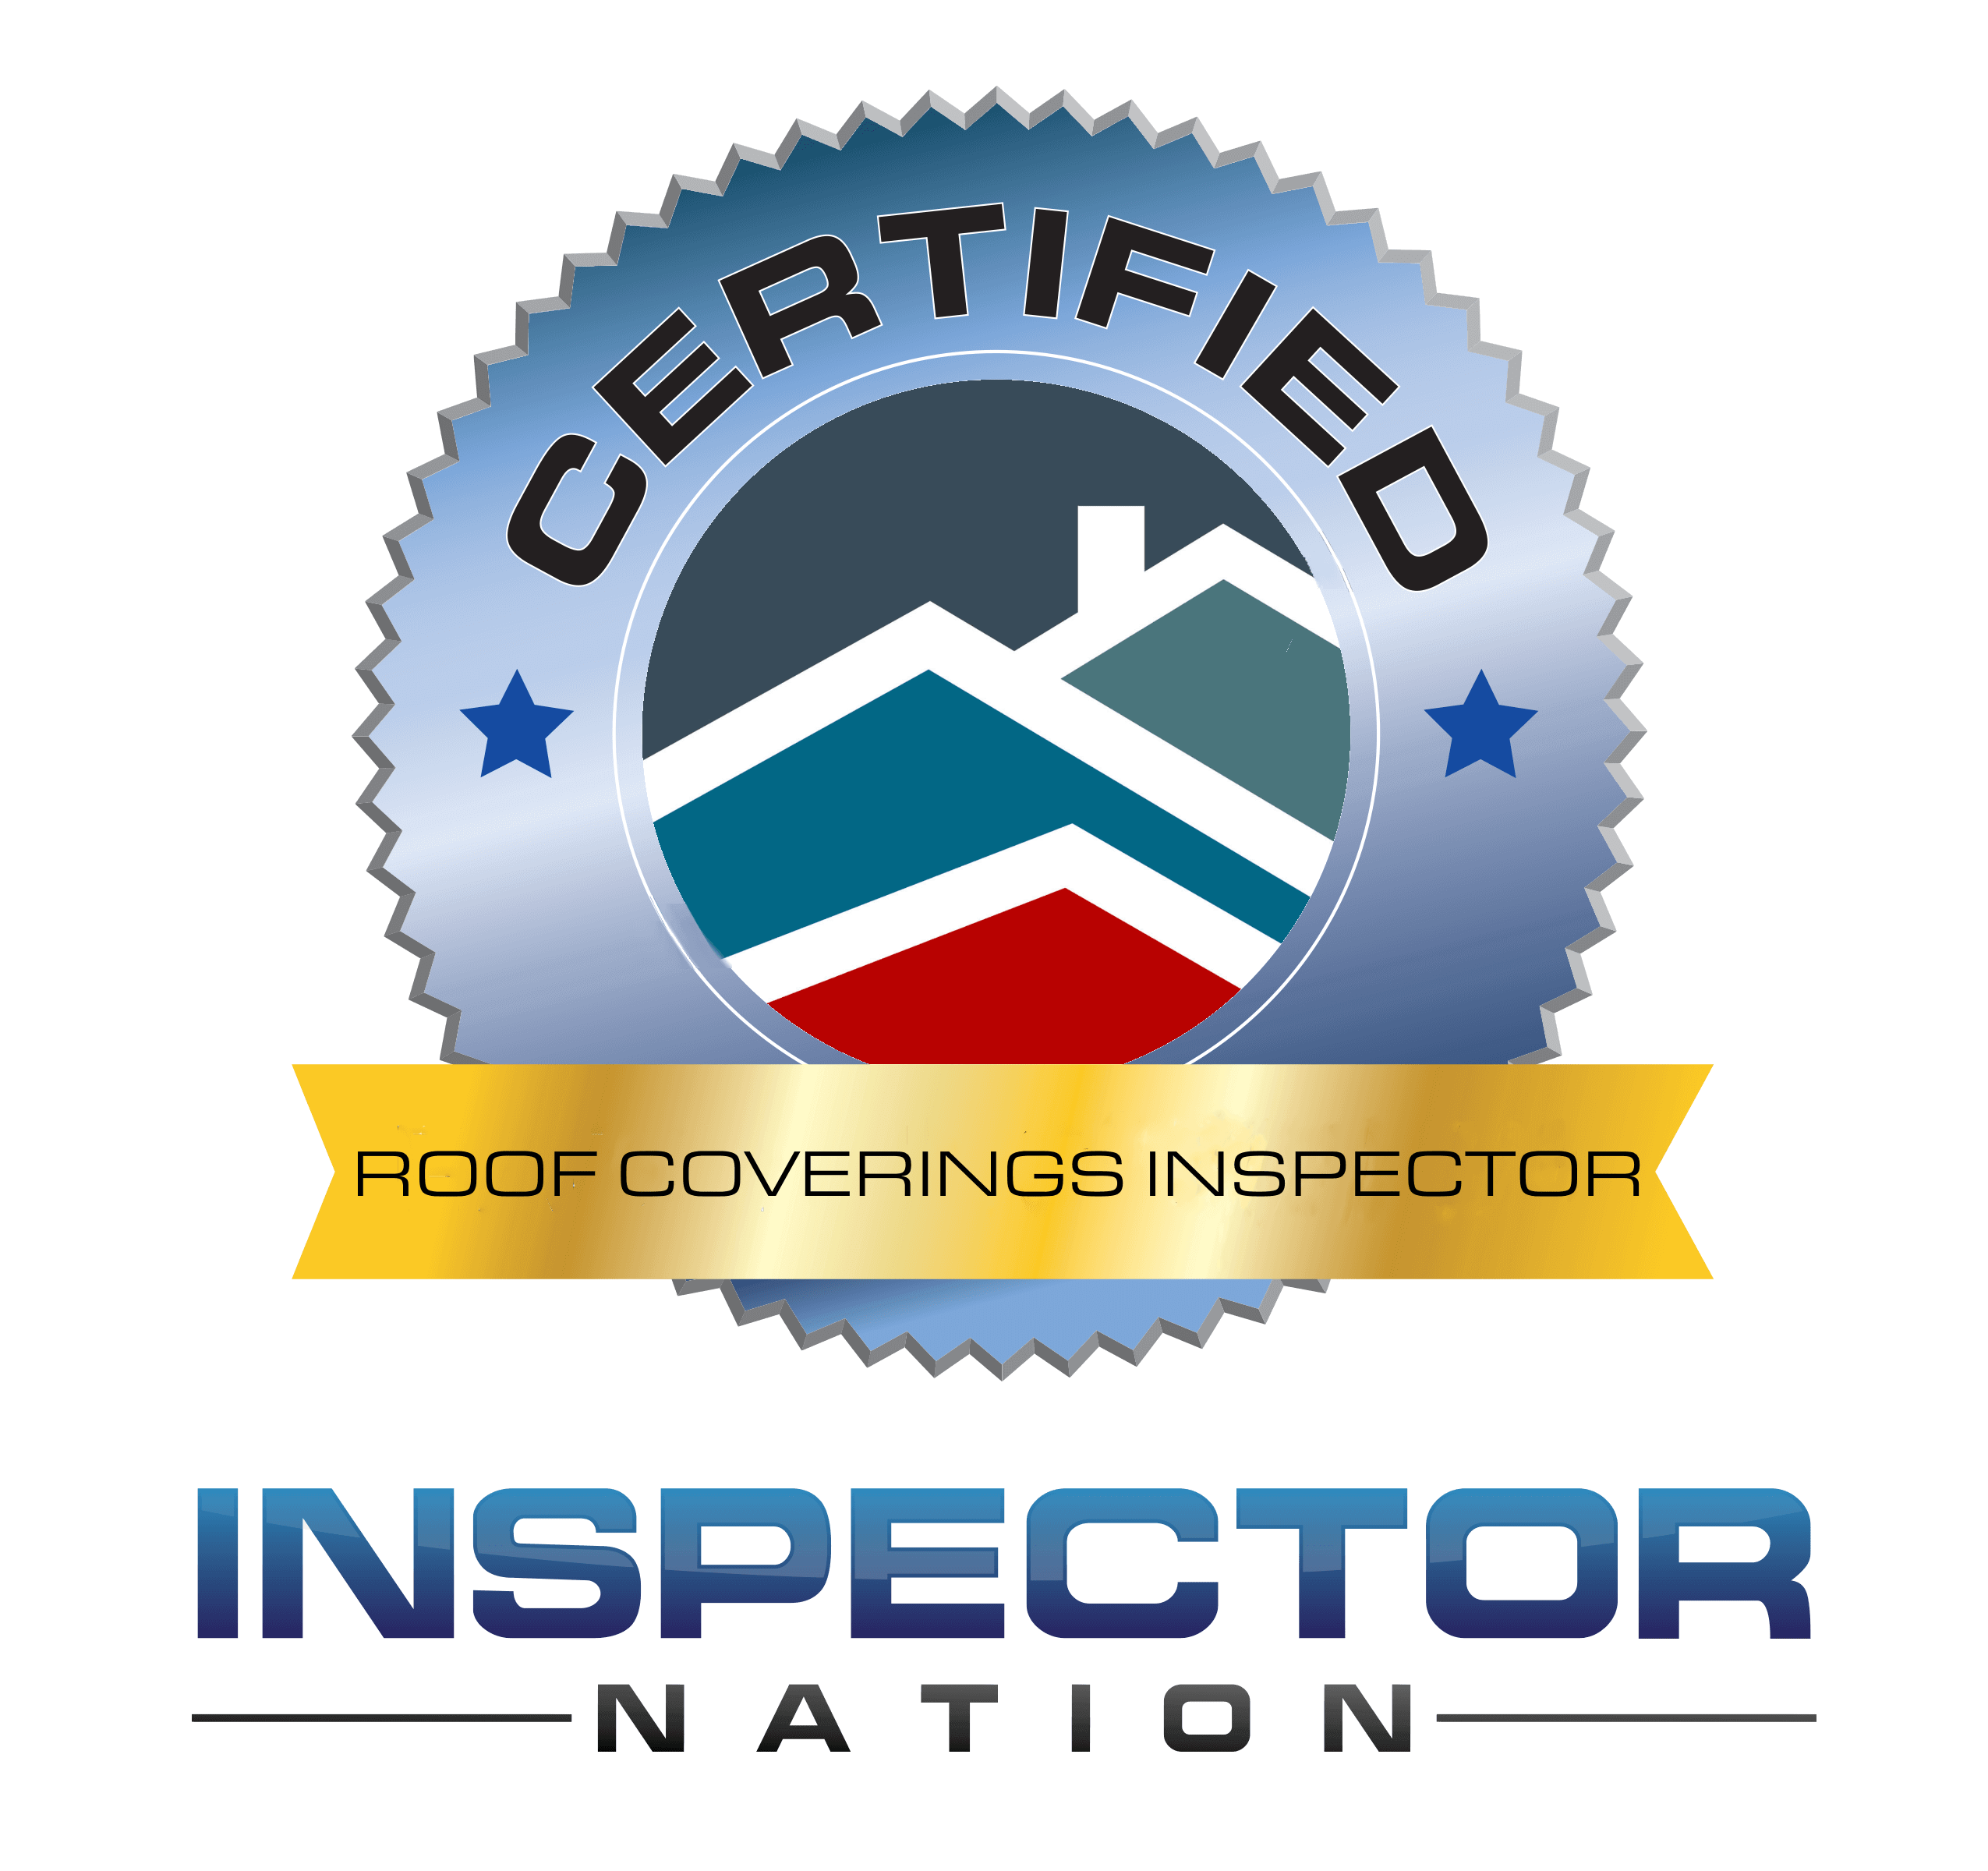 Roof Coverings Inspector